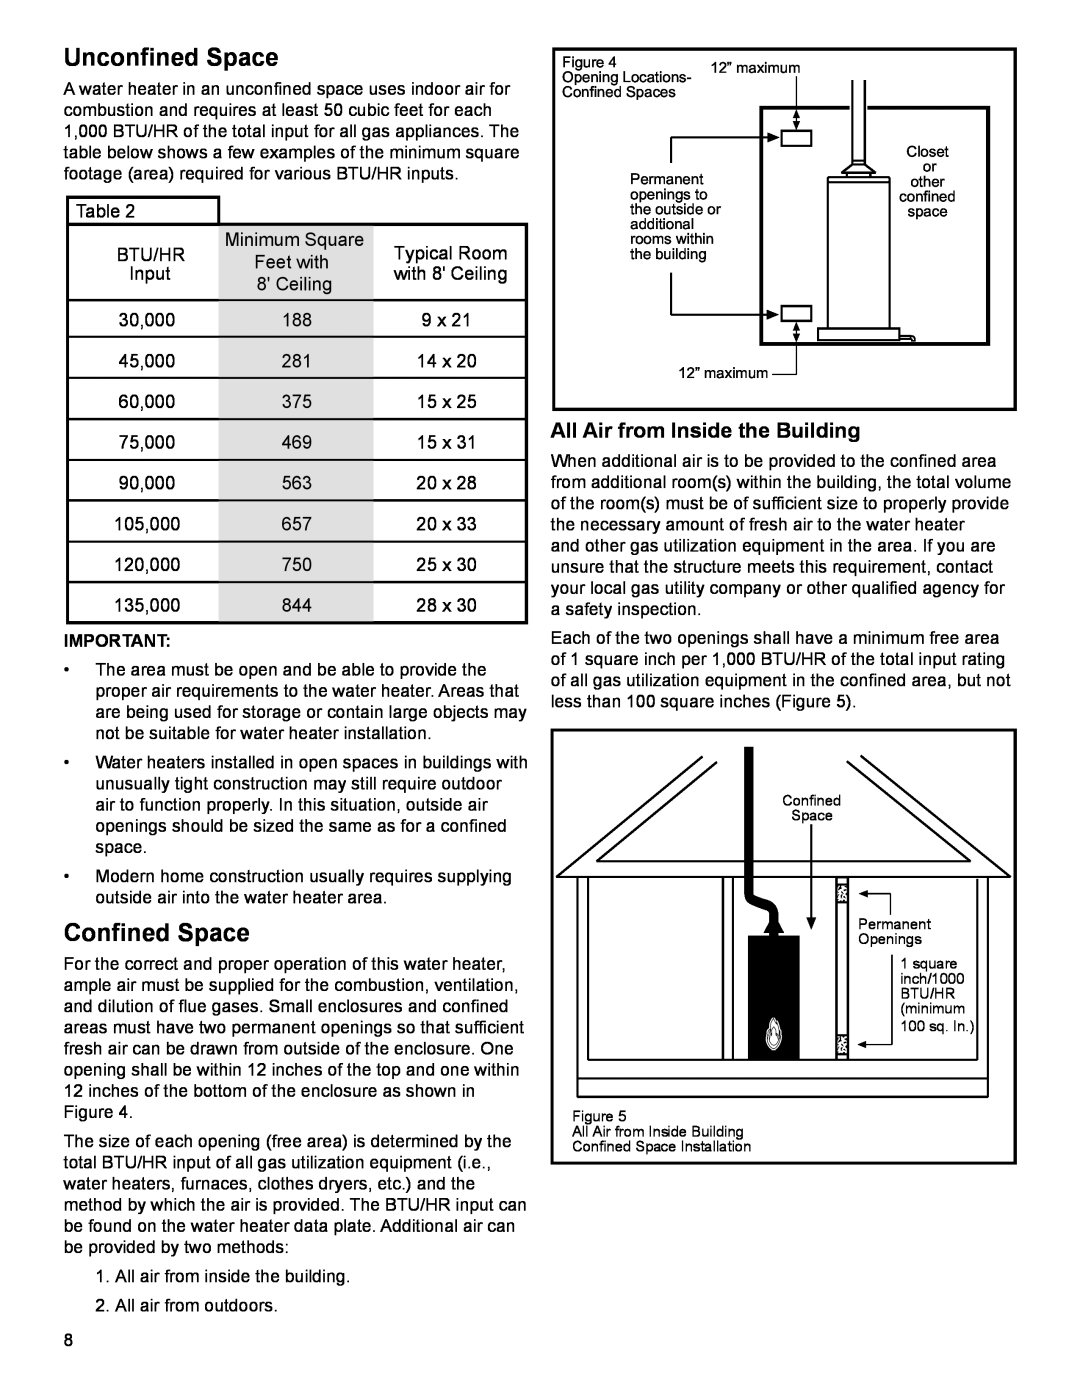 American Water Heater 318935-003 Unconfined Space, Confined Space, All Air from Inside the Building 